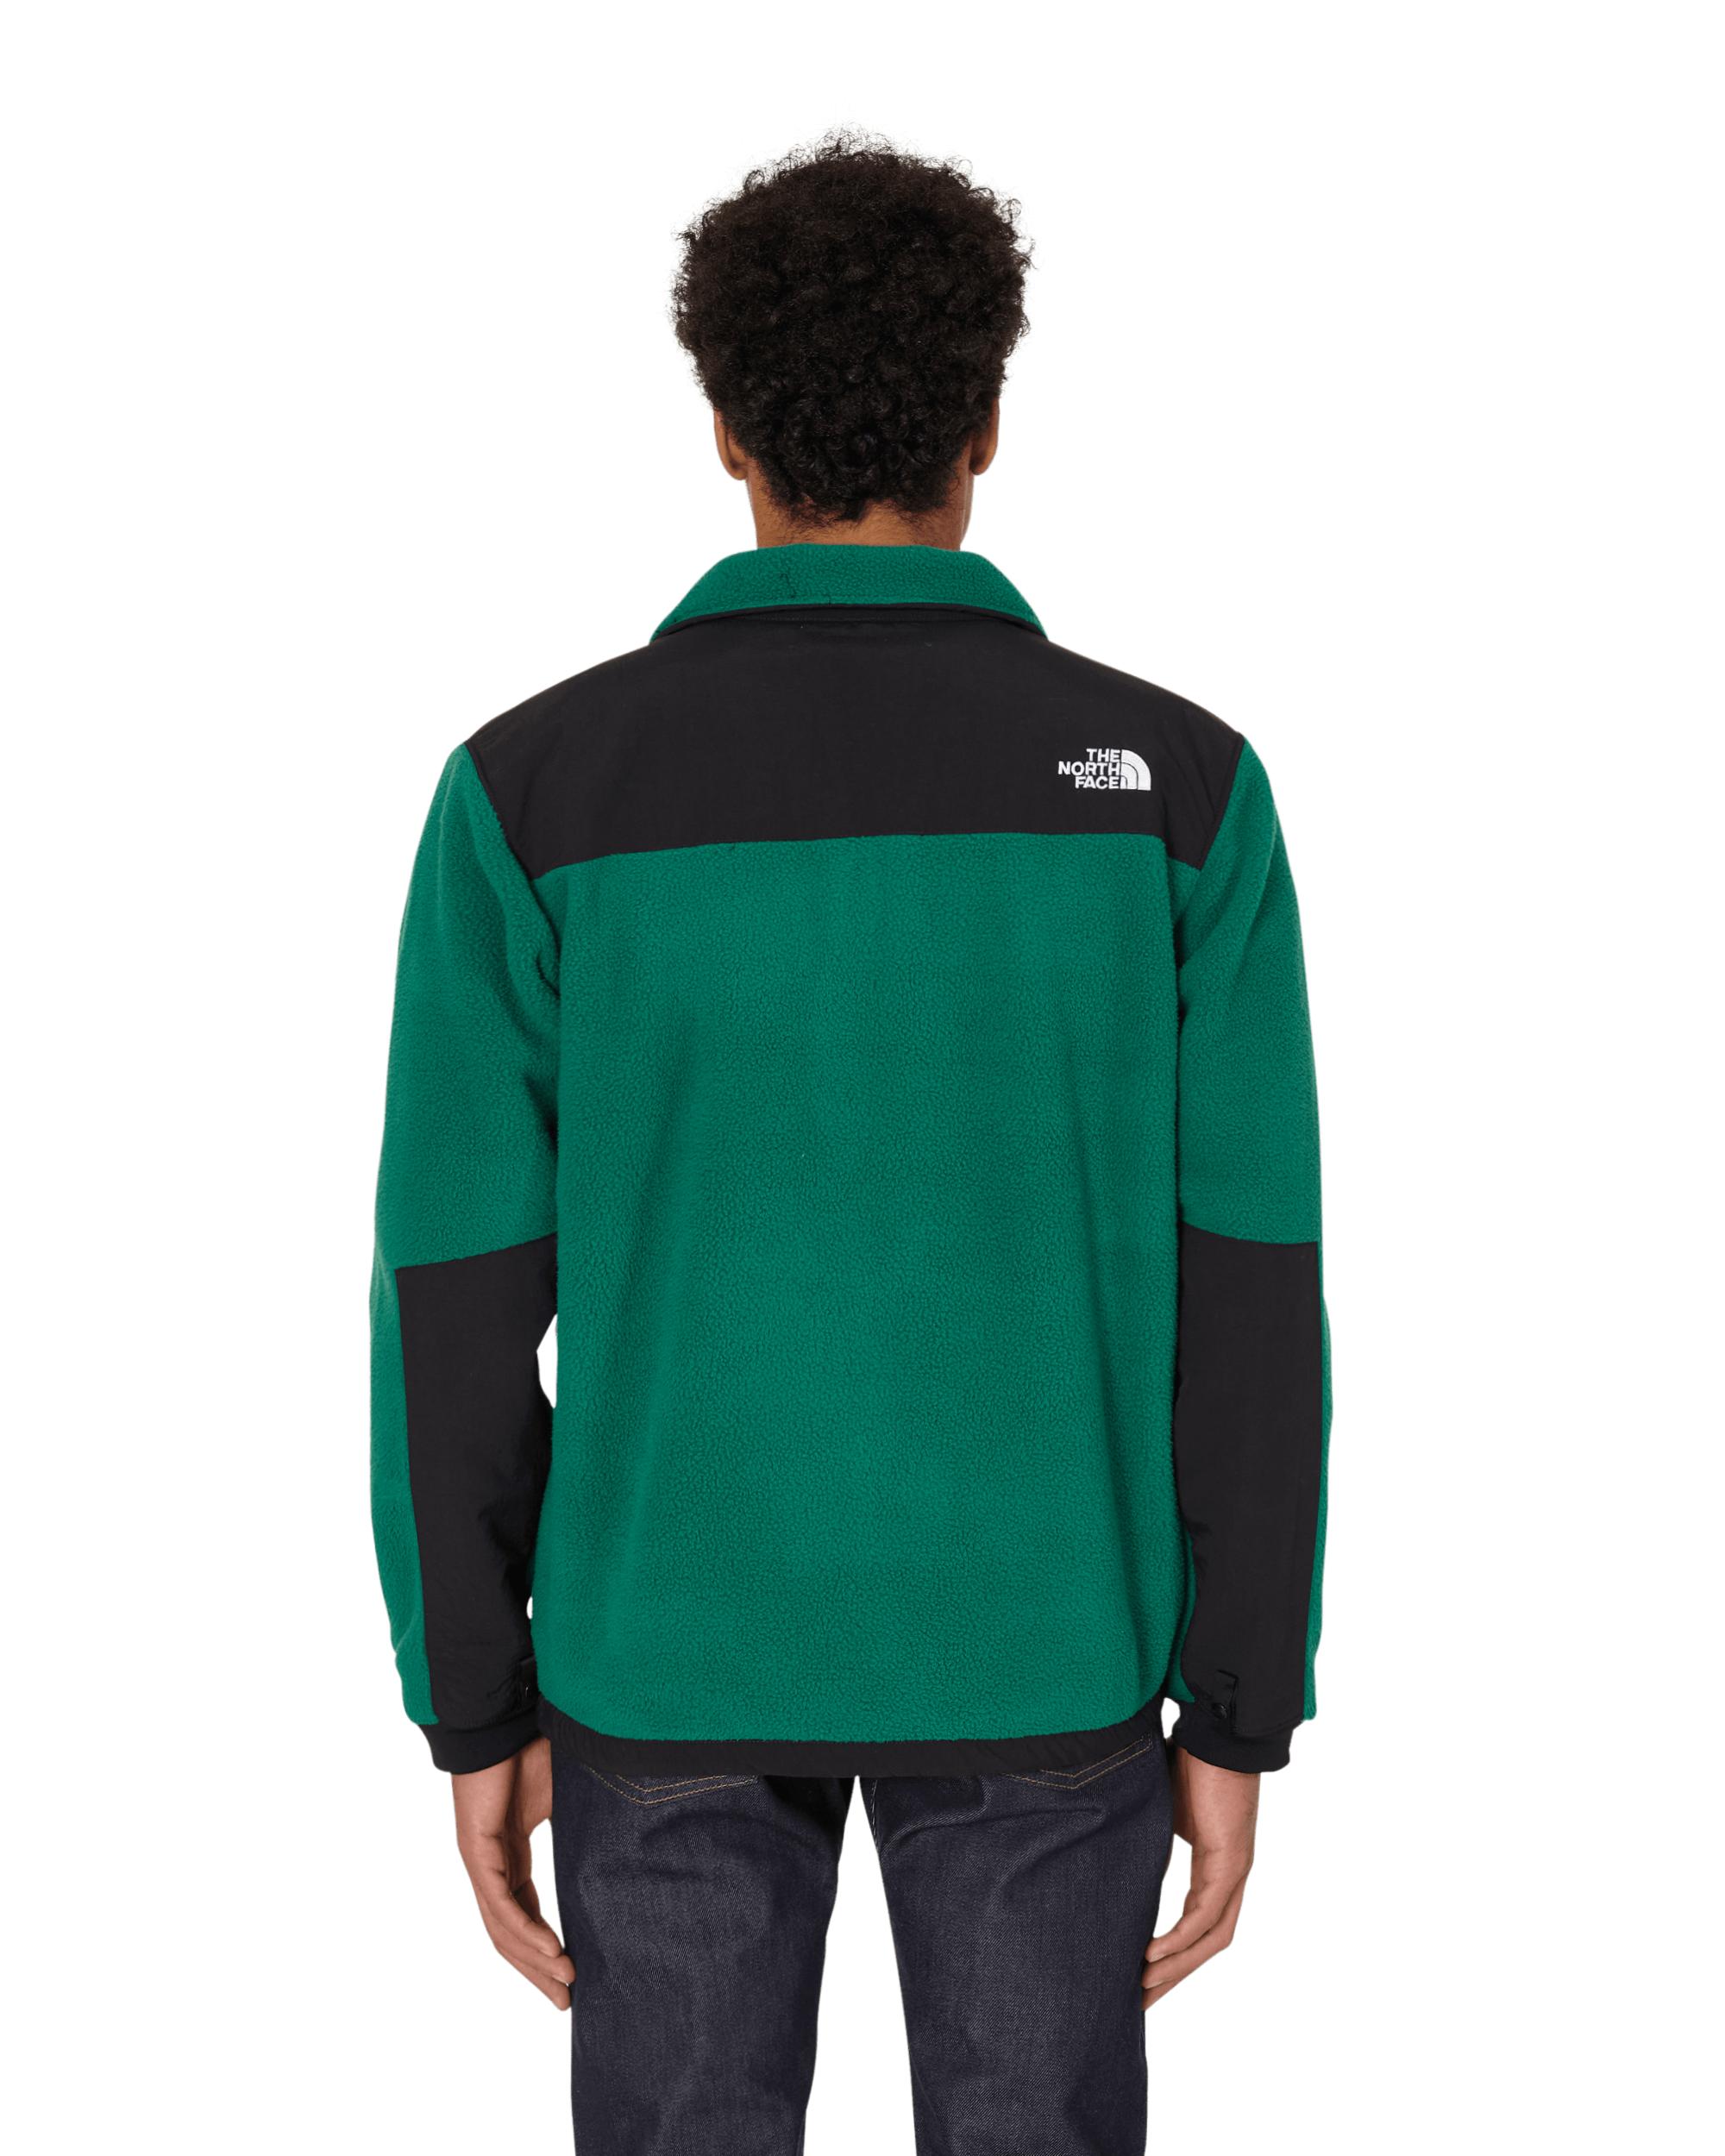 The North Face 95 Retro Denali Jacket in Green for Men